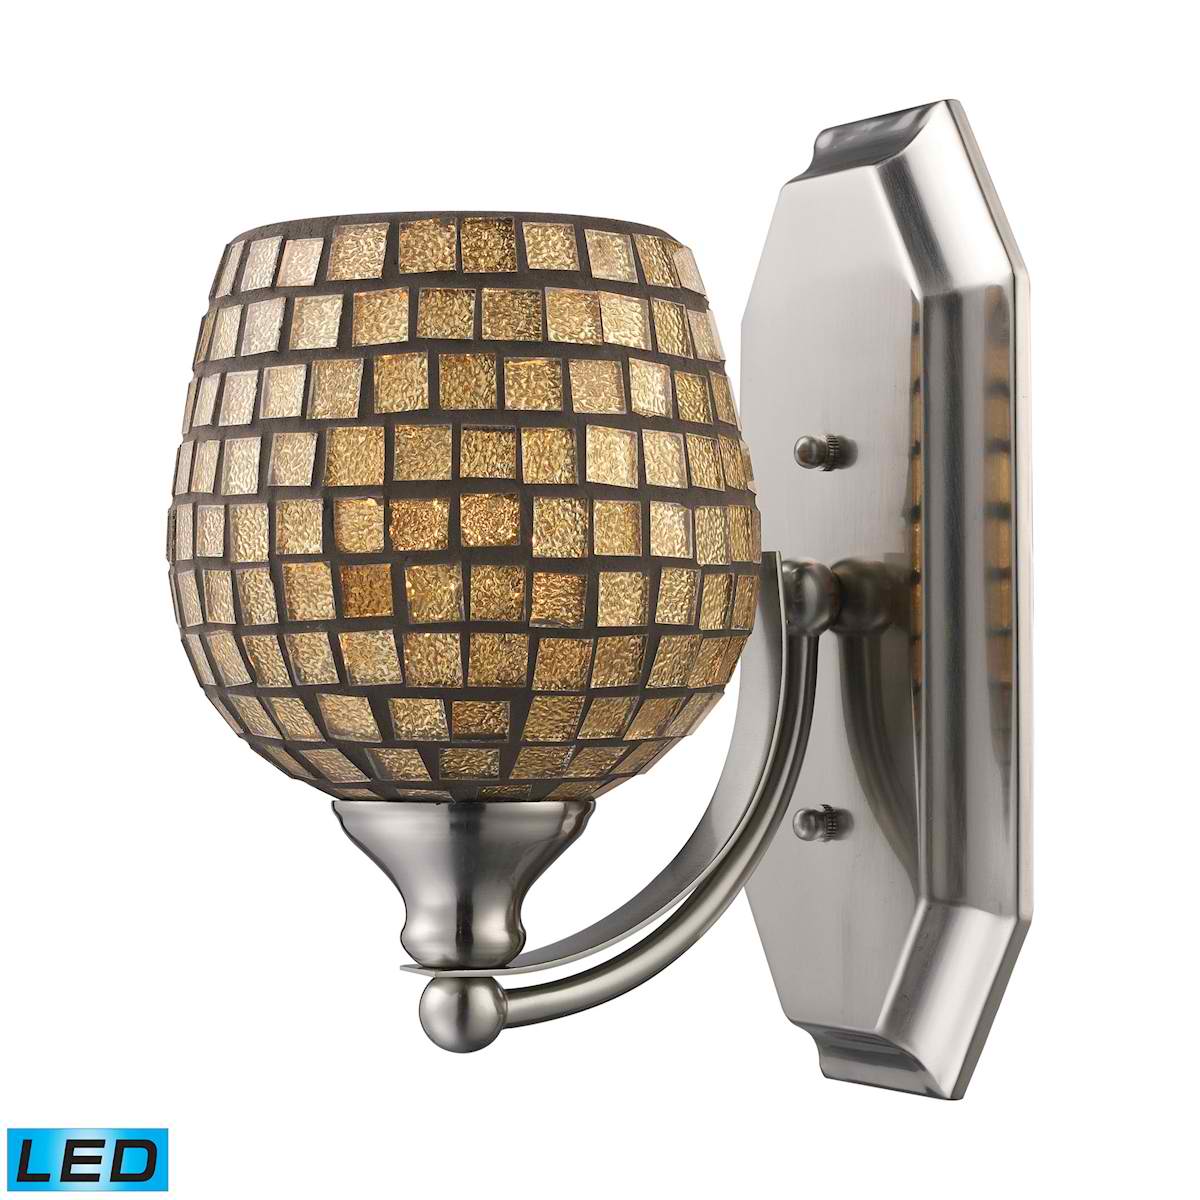 1 Light Vanity in Polished Chrome and Gold Mosaic Glass - LED Offering Up To 800 Lumens (60 Watt Equivalent)